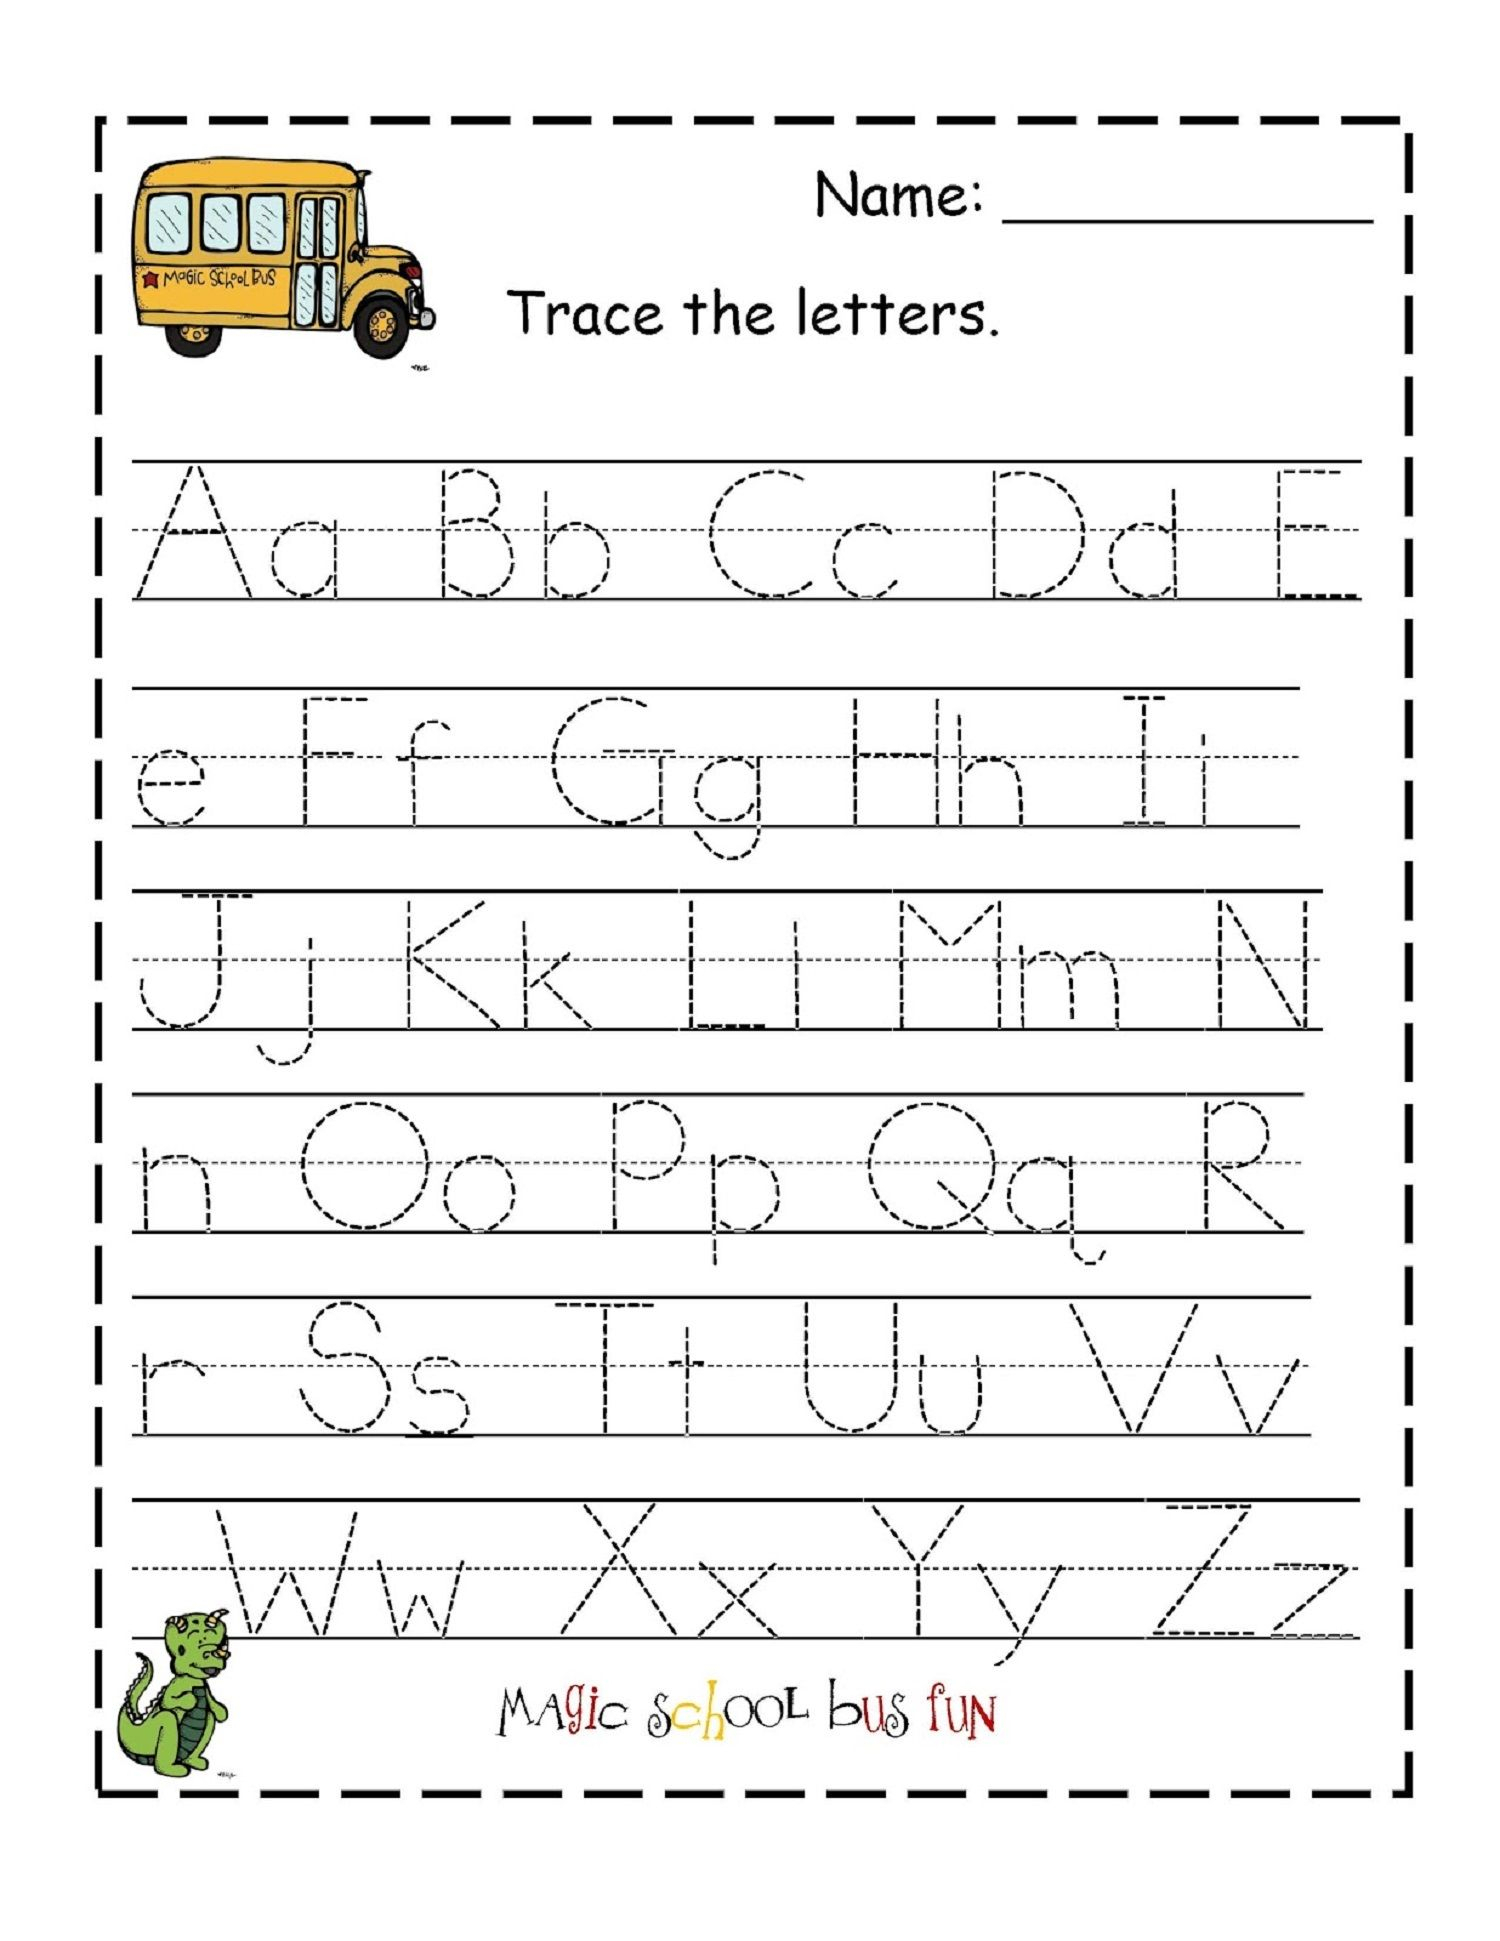 Traceable Alphabet For Learning Exercise | Letter Tracing in Tracing Letters Printable Free